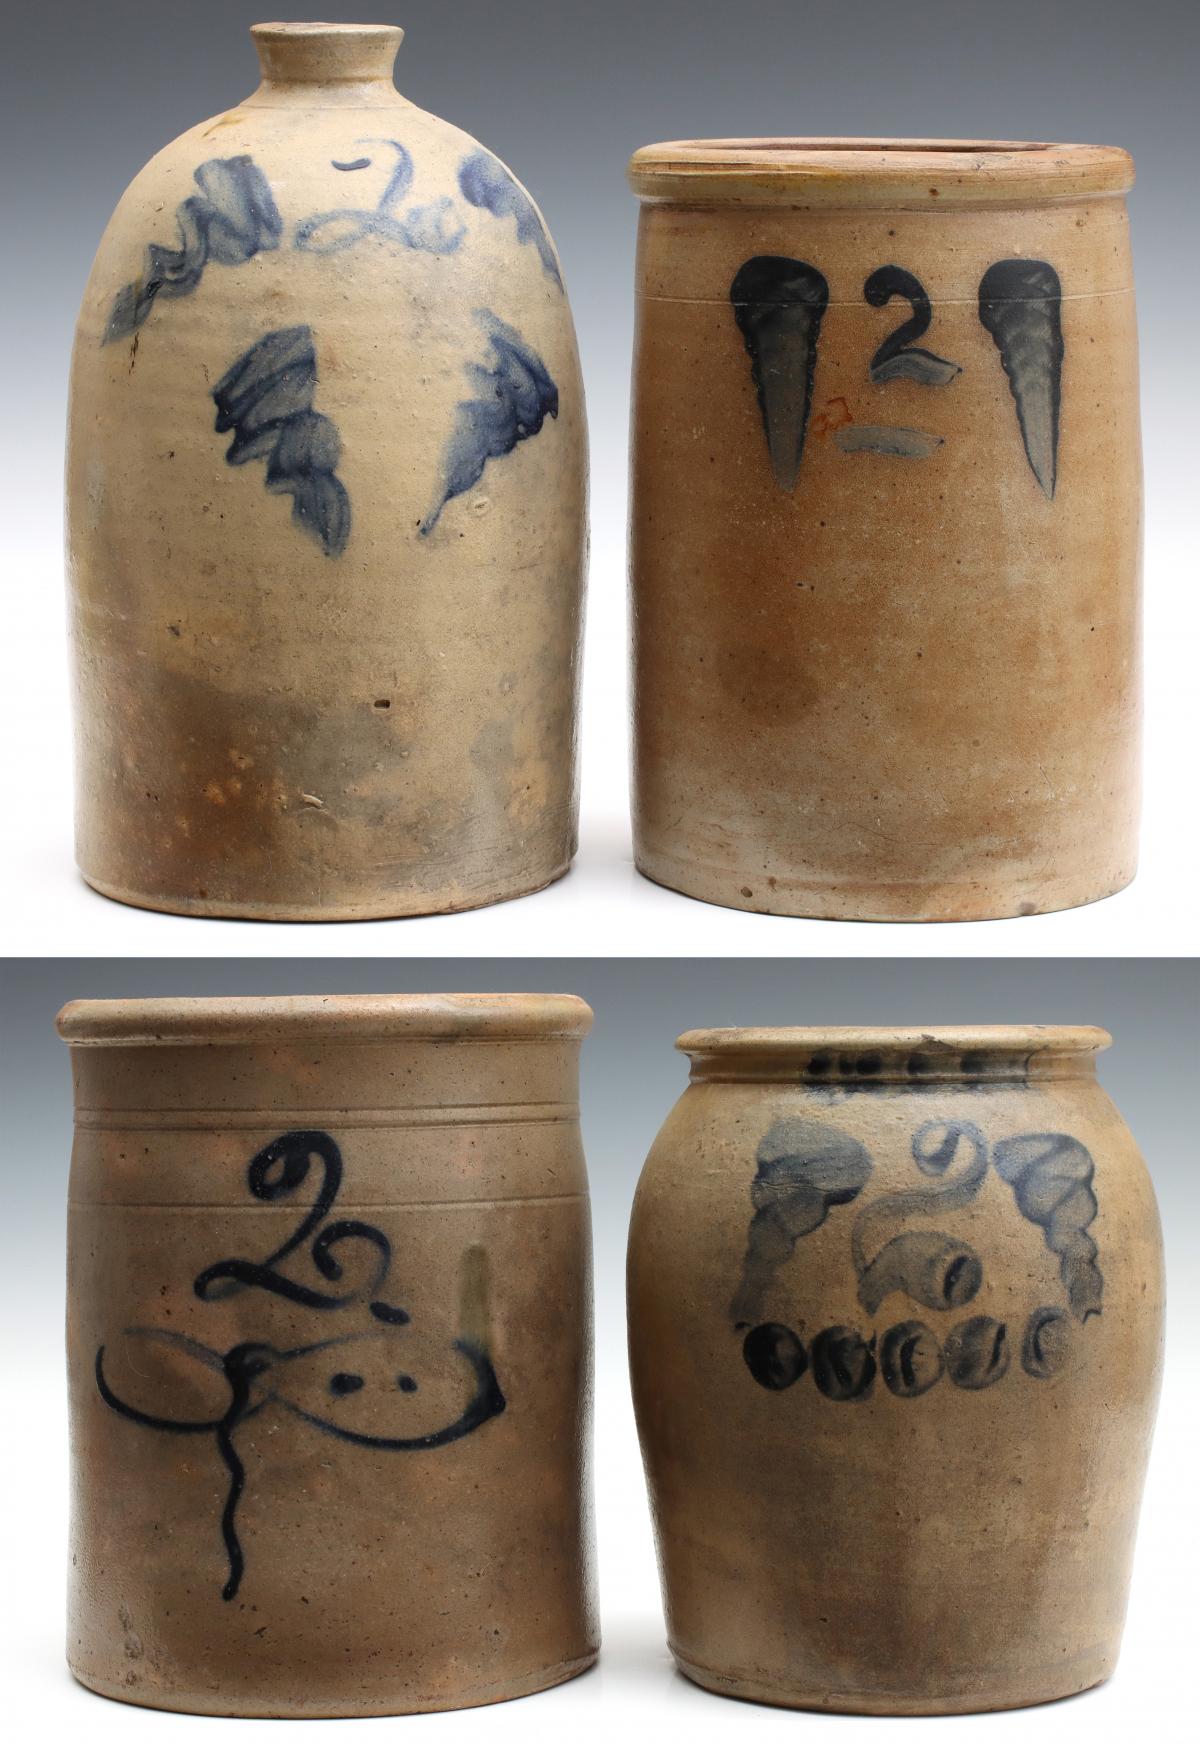 A COLLECTION OF 19TH C. BLUE DECORATED STONEWARE JARS